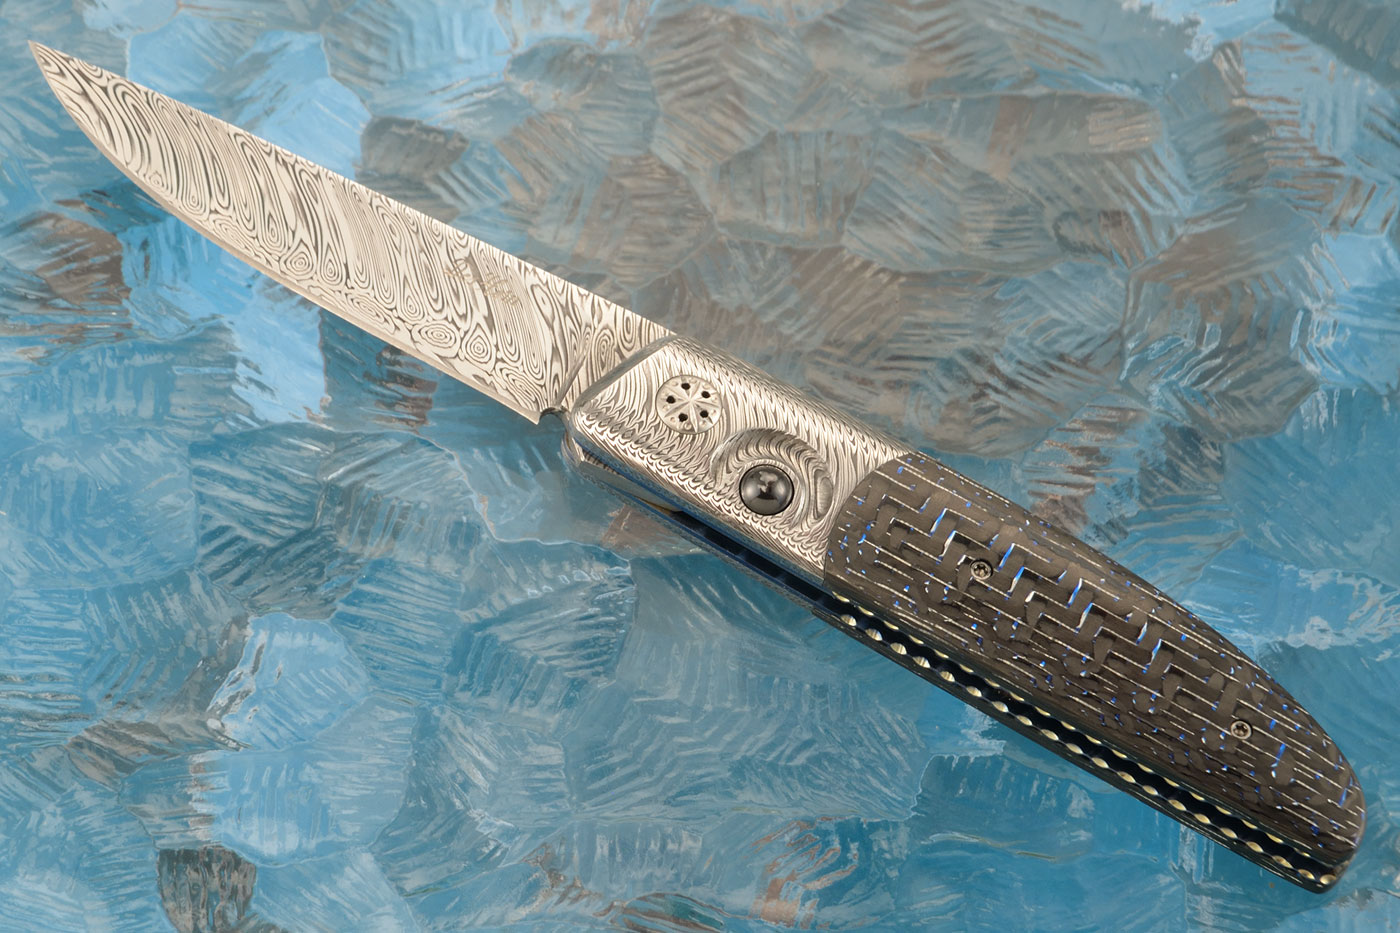 Small Ball Release Front Flipper with Damasteel and Carbon Fiber